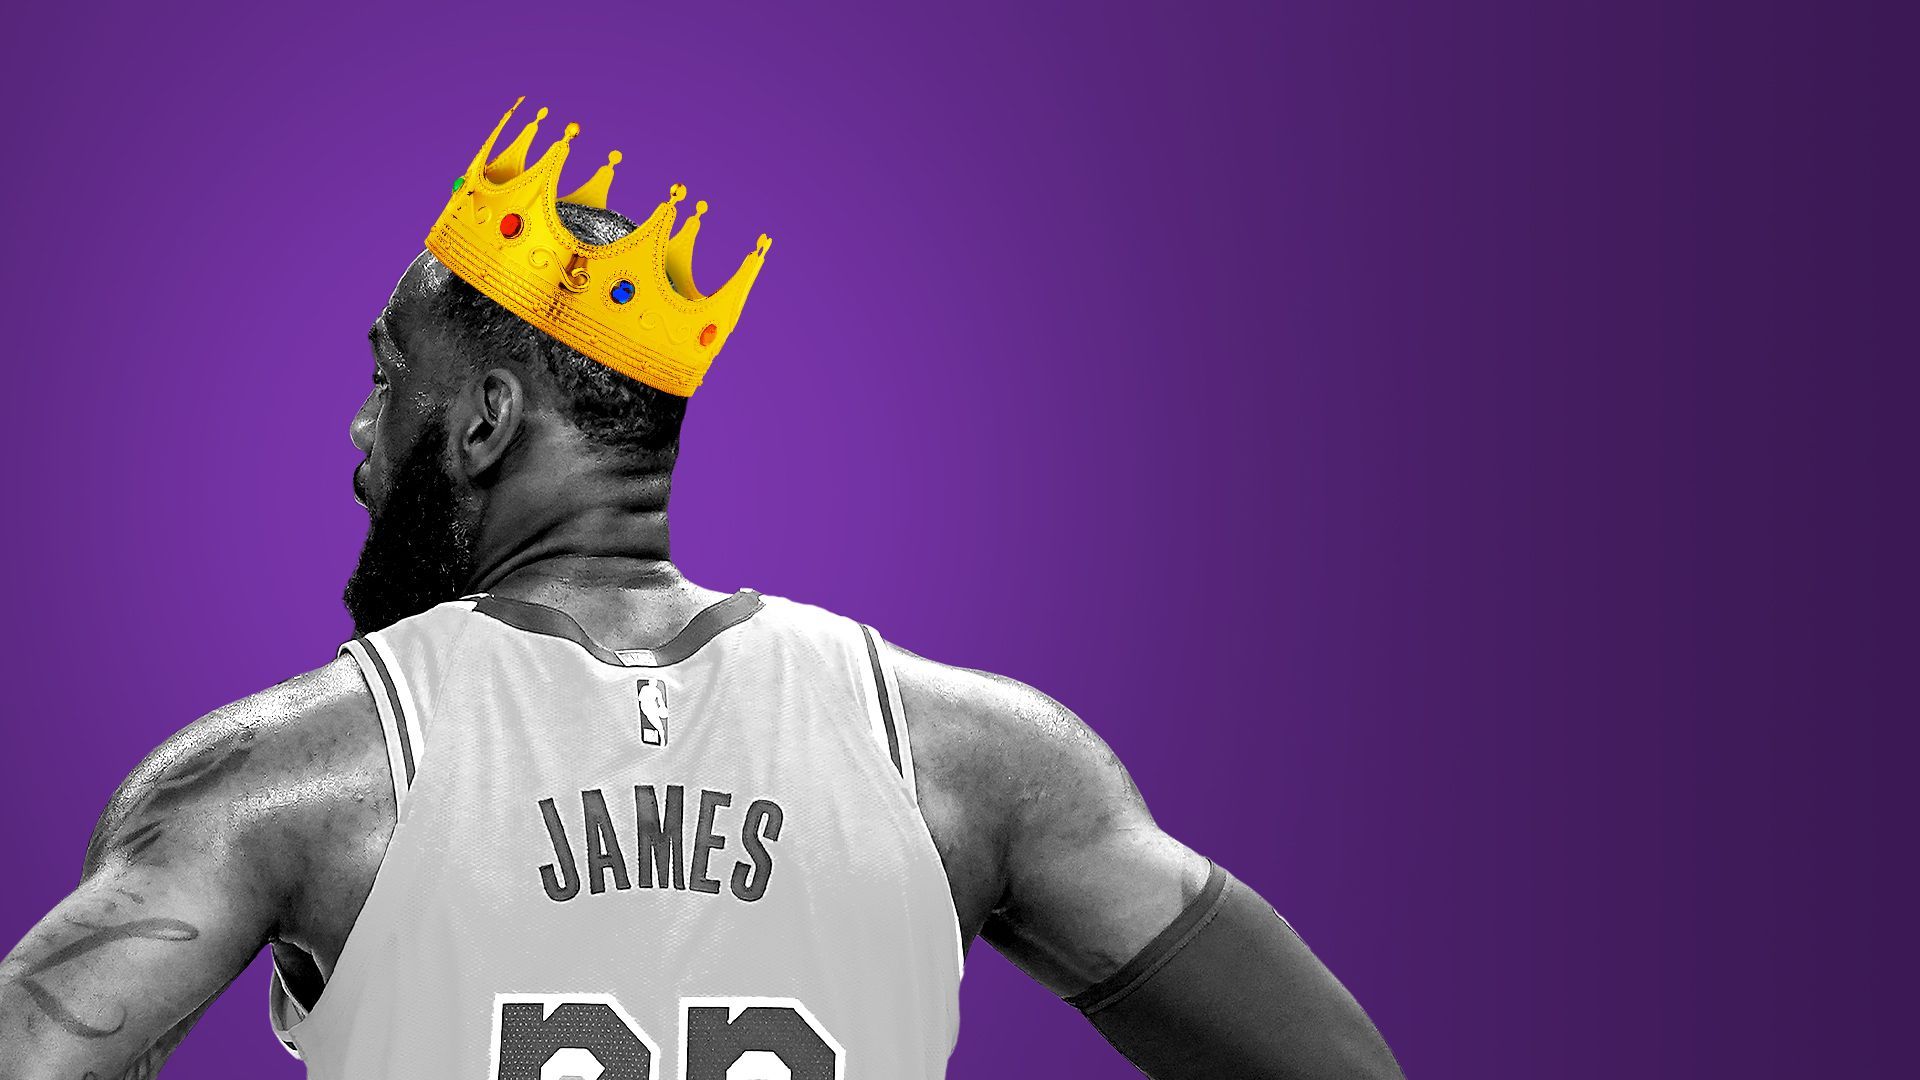 Illustration of Lebron James with a crown on his head